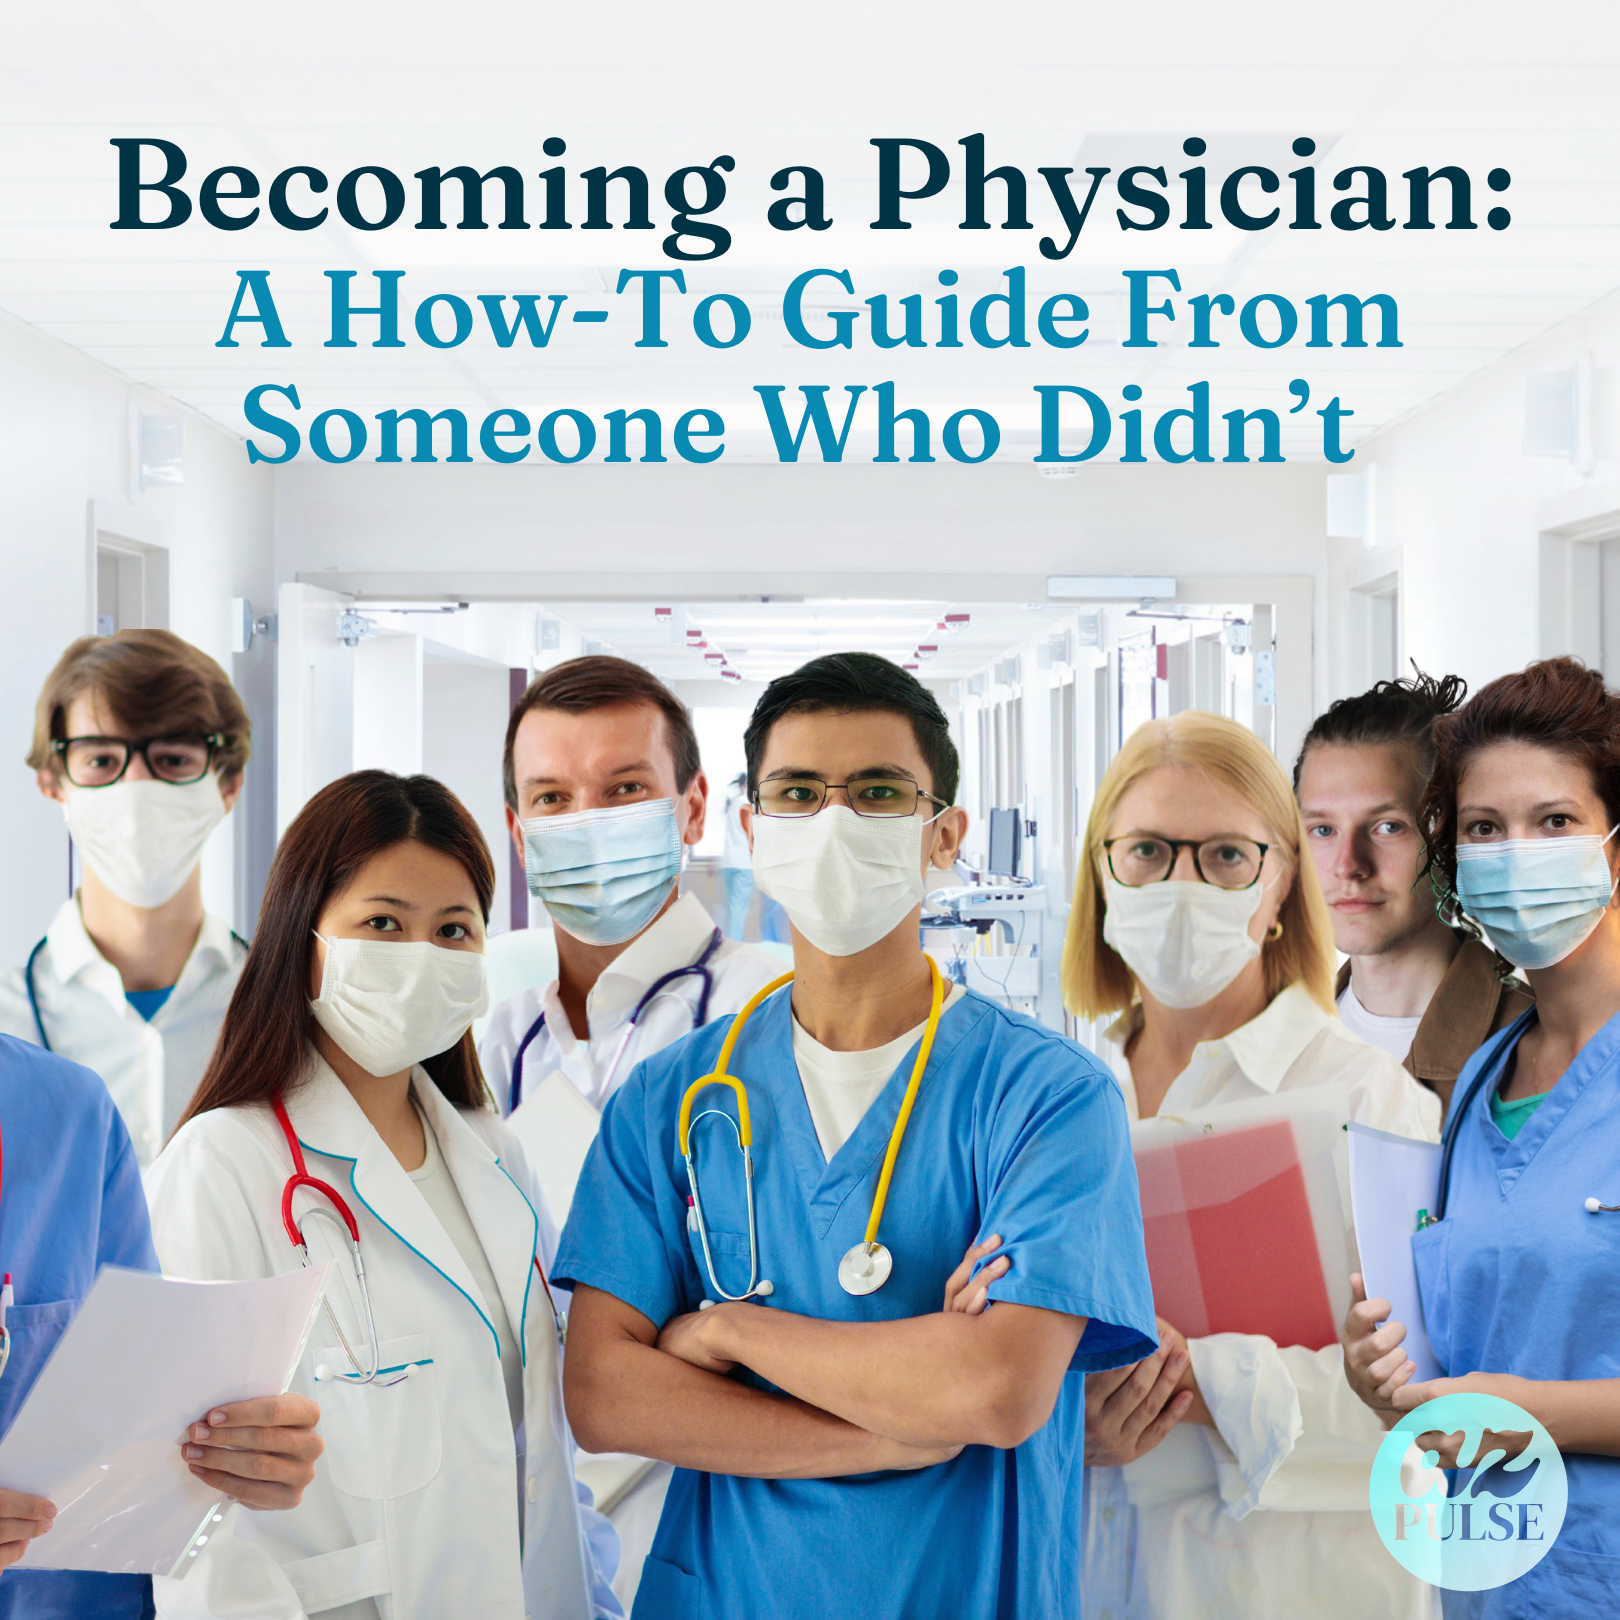 Becoming a Physician Article